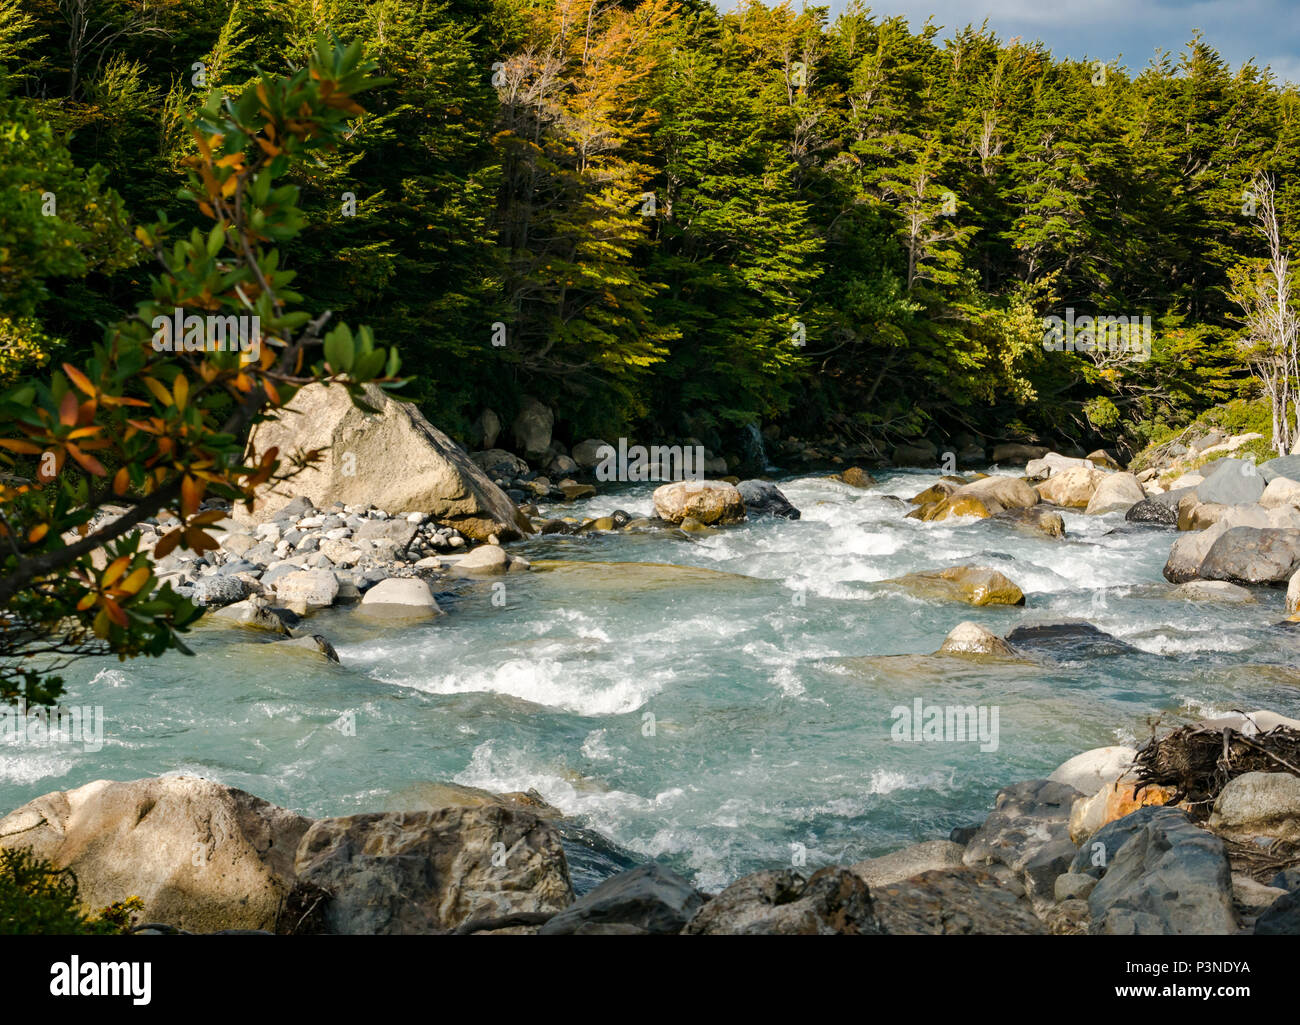 Glacier melt water mountain river, French Valley, Torres del Paine National Park, Patagonia, Chile Stock Photo